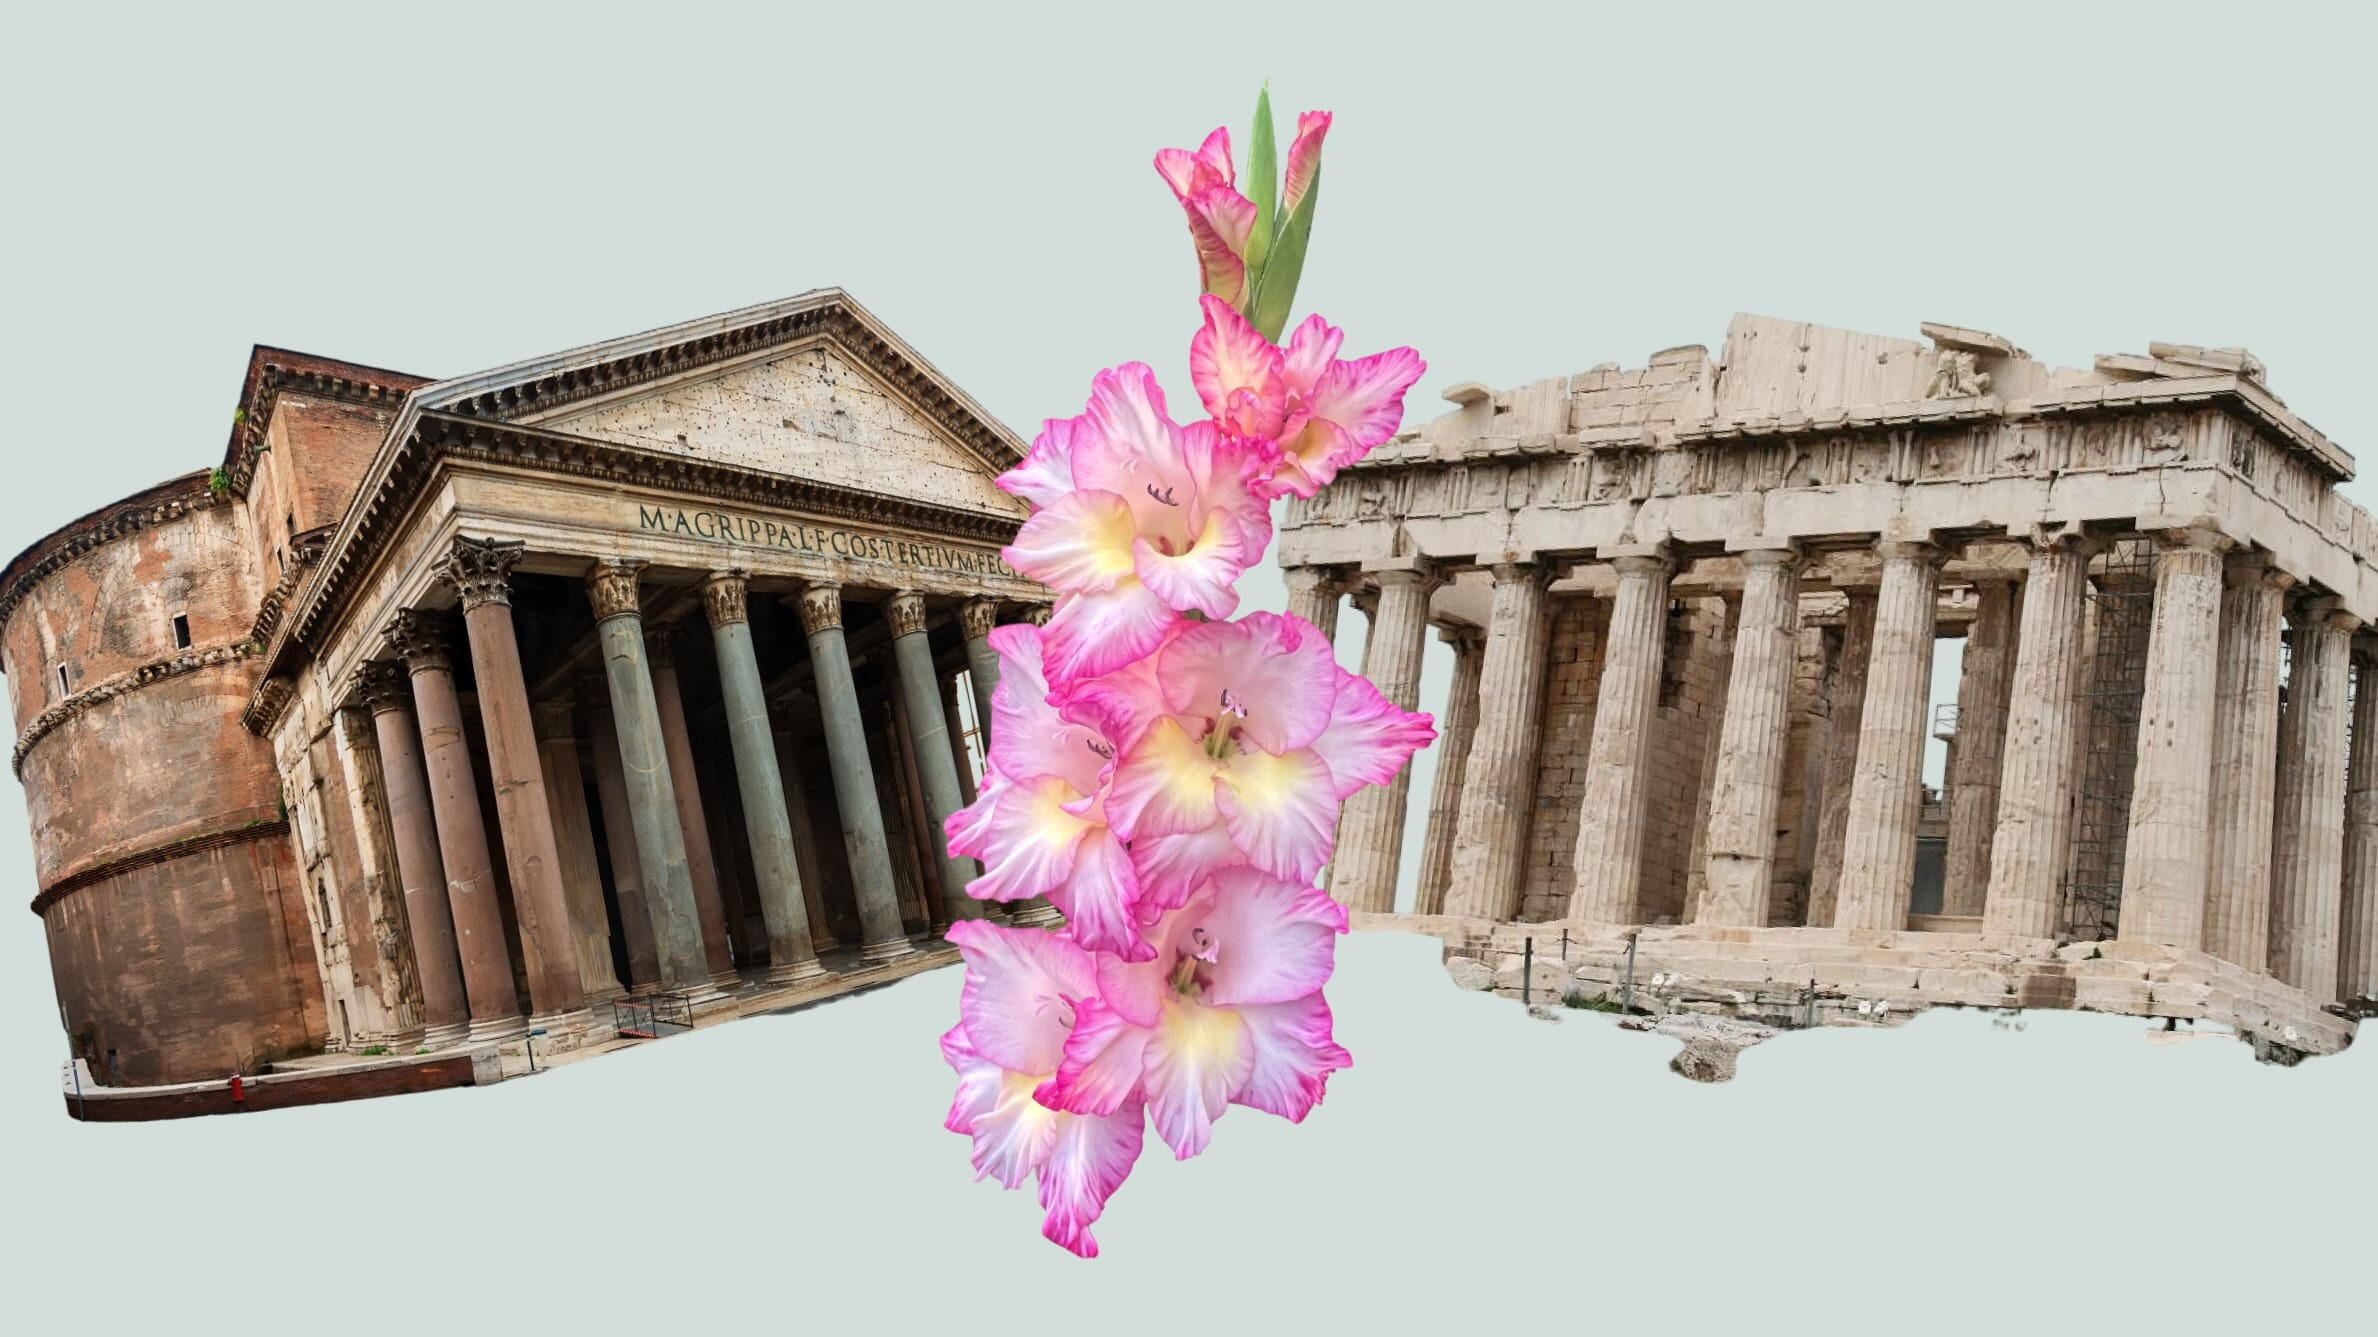 The Gladiolus Flower in History